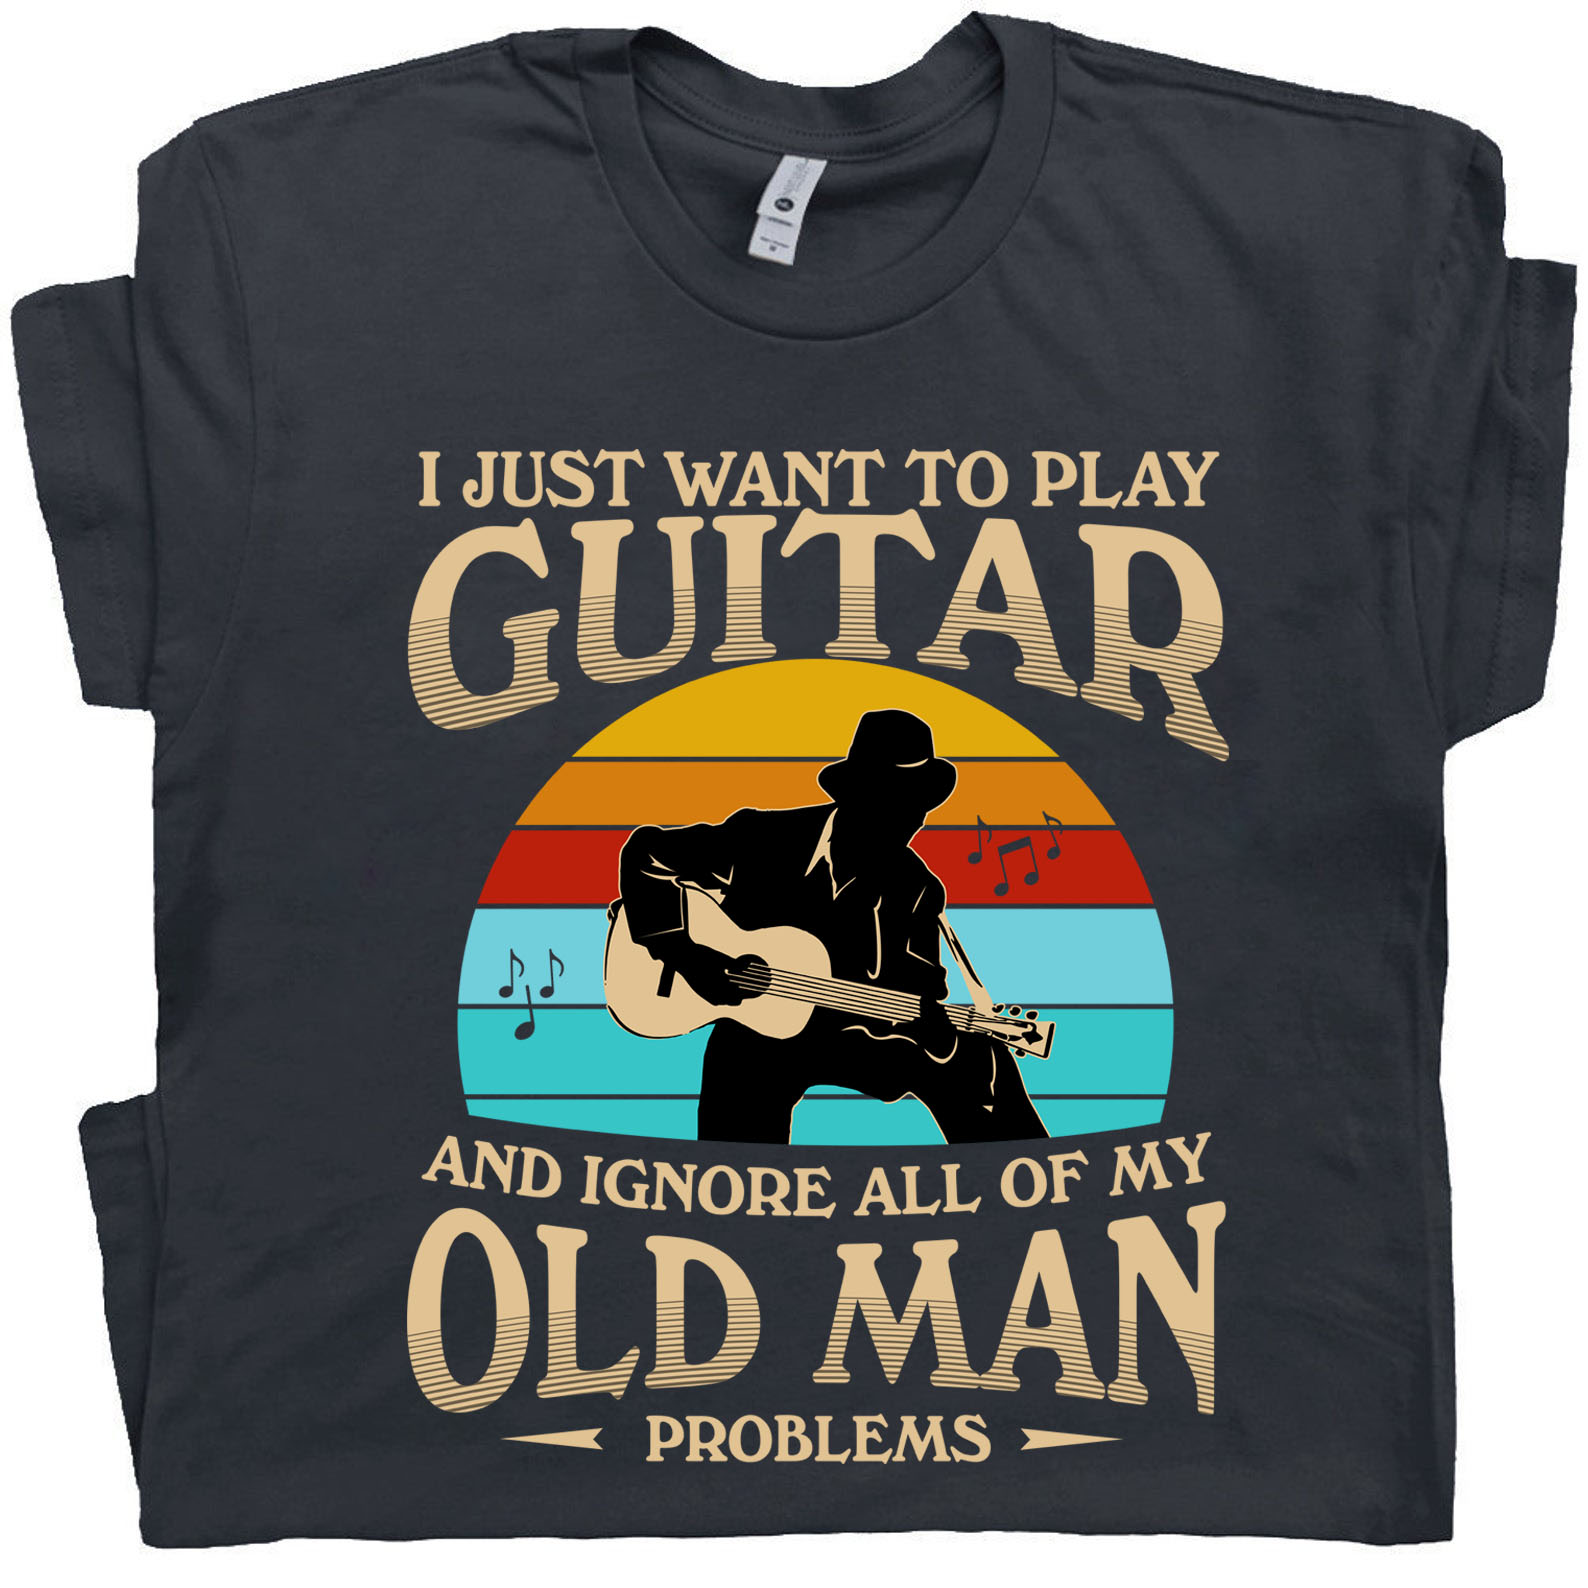 I just want to play guitar and ignore all of my old man problems